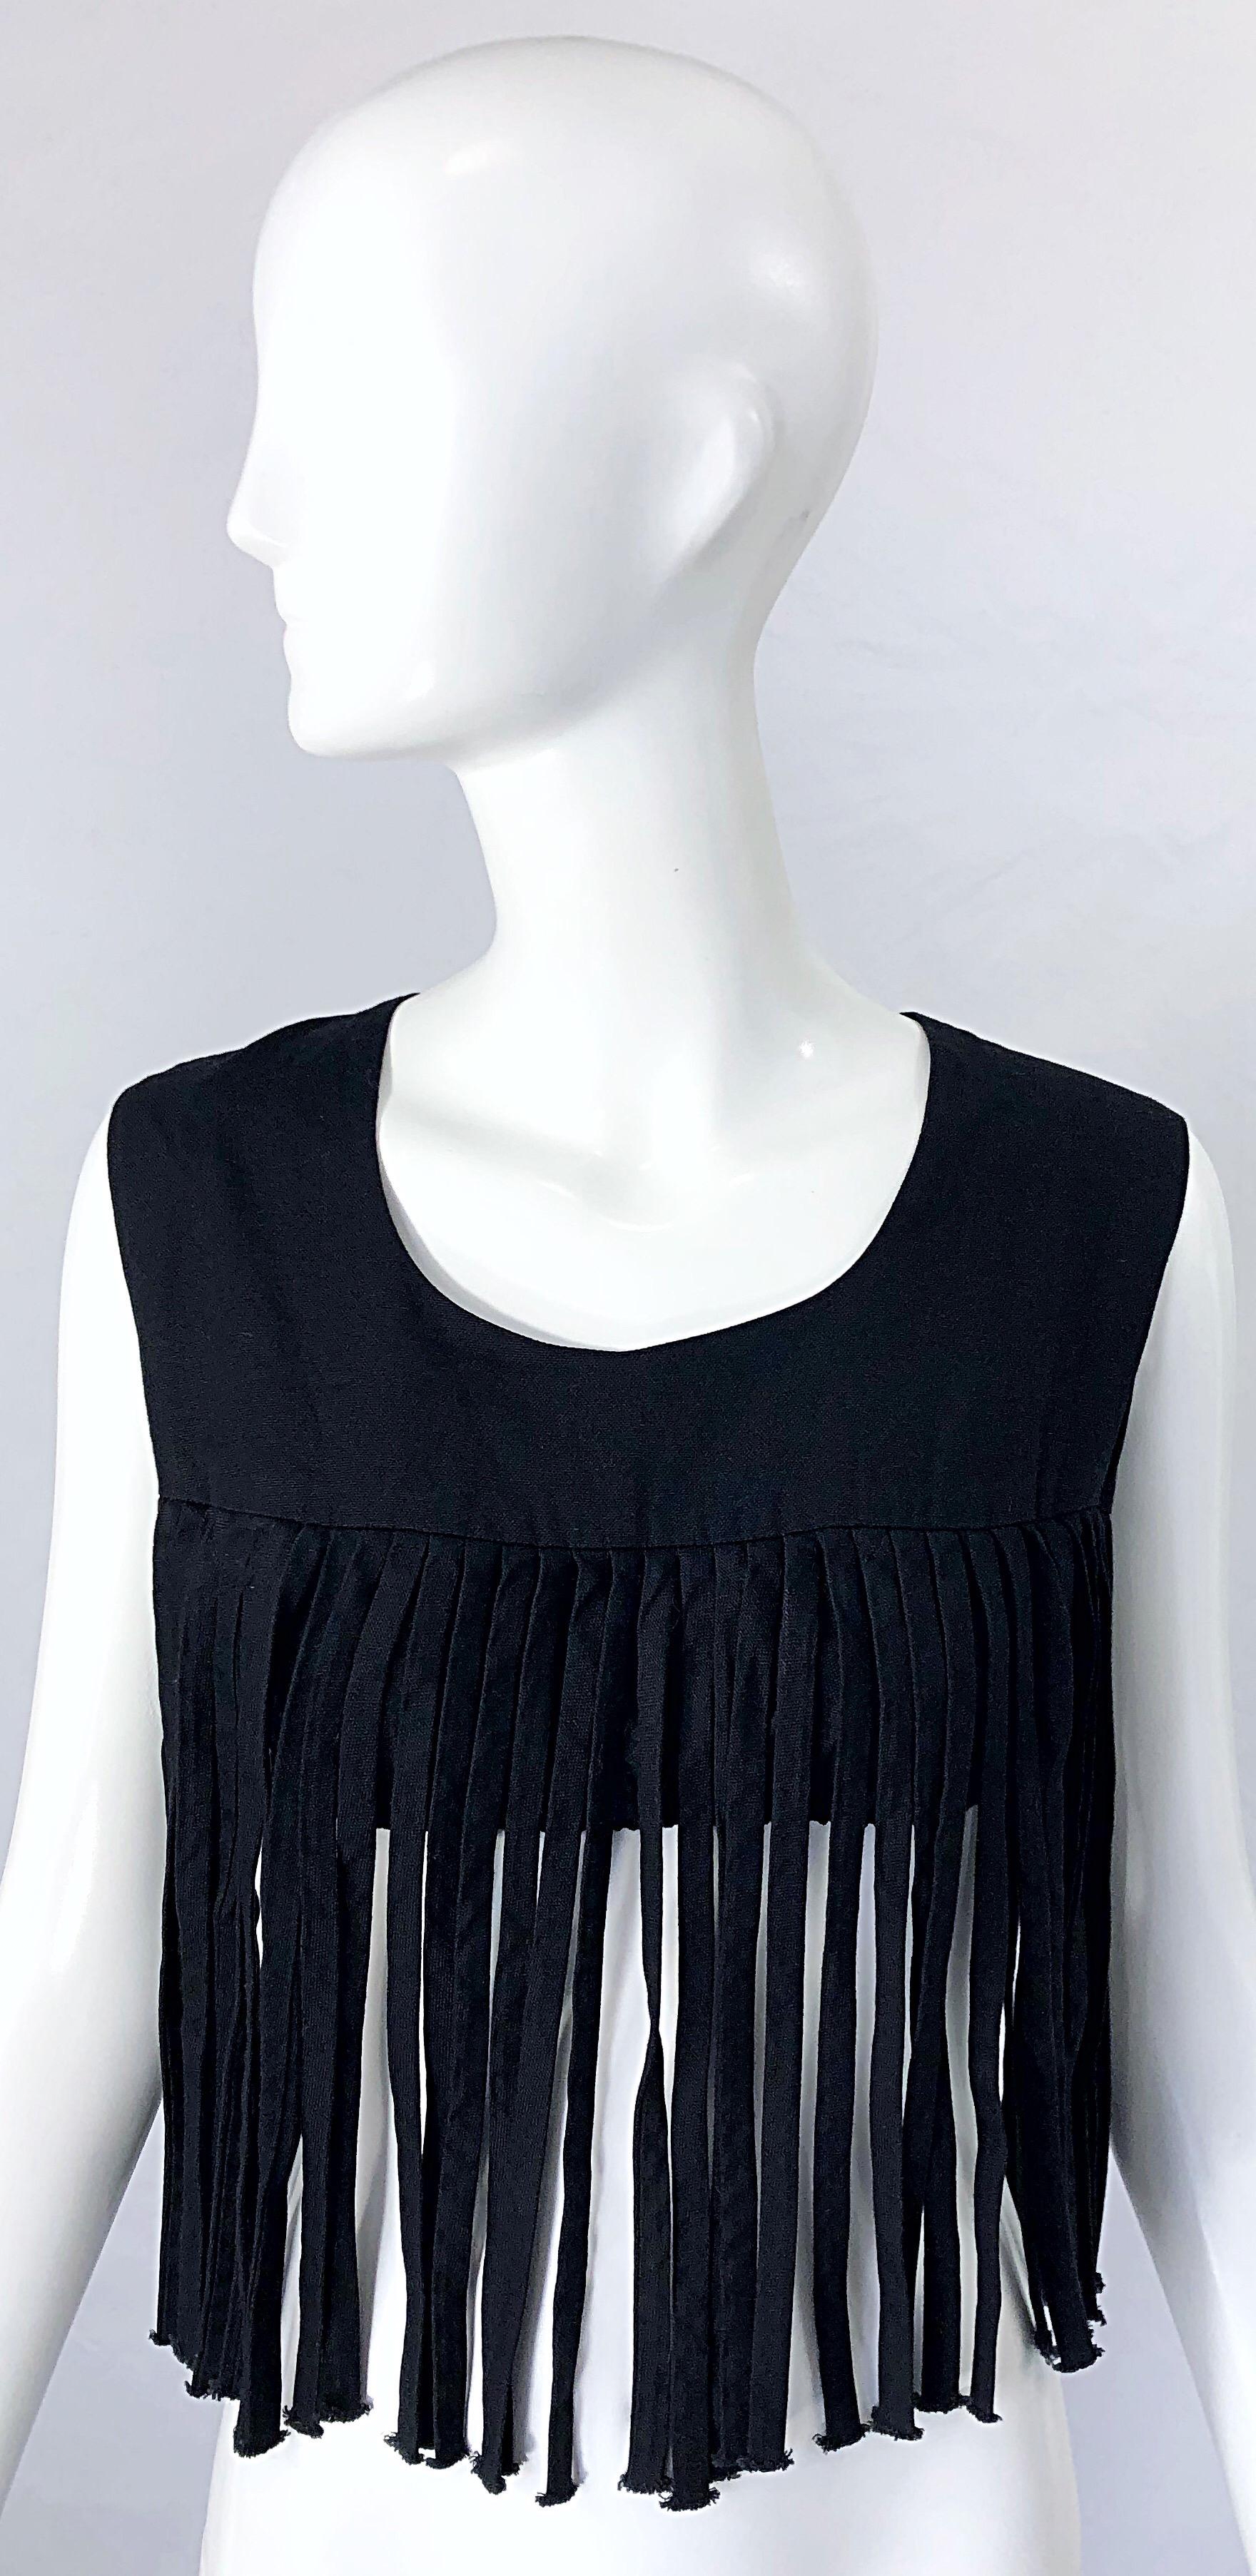 Boho chic black linen fringed crop top ! Features fringe around the hem on the front and back. Buttons up the back. Elastic band under bust keeps everything in place. Great with jeans, trousers, shorts or a skirt. 
Very well made in